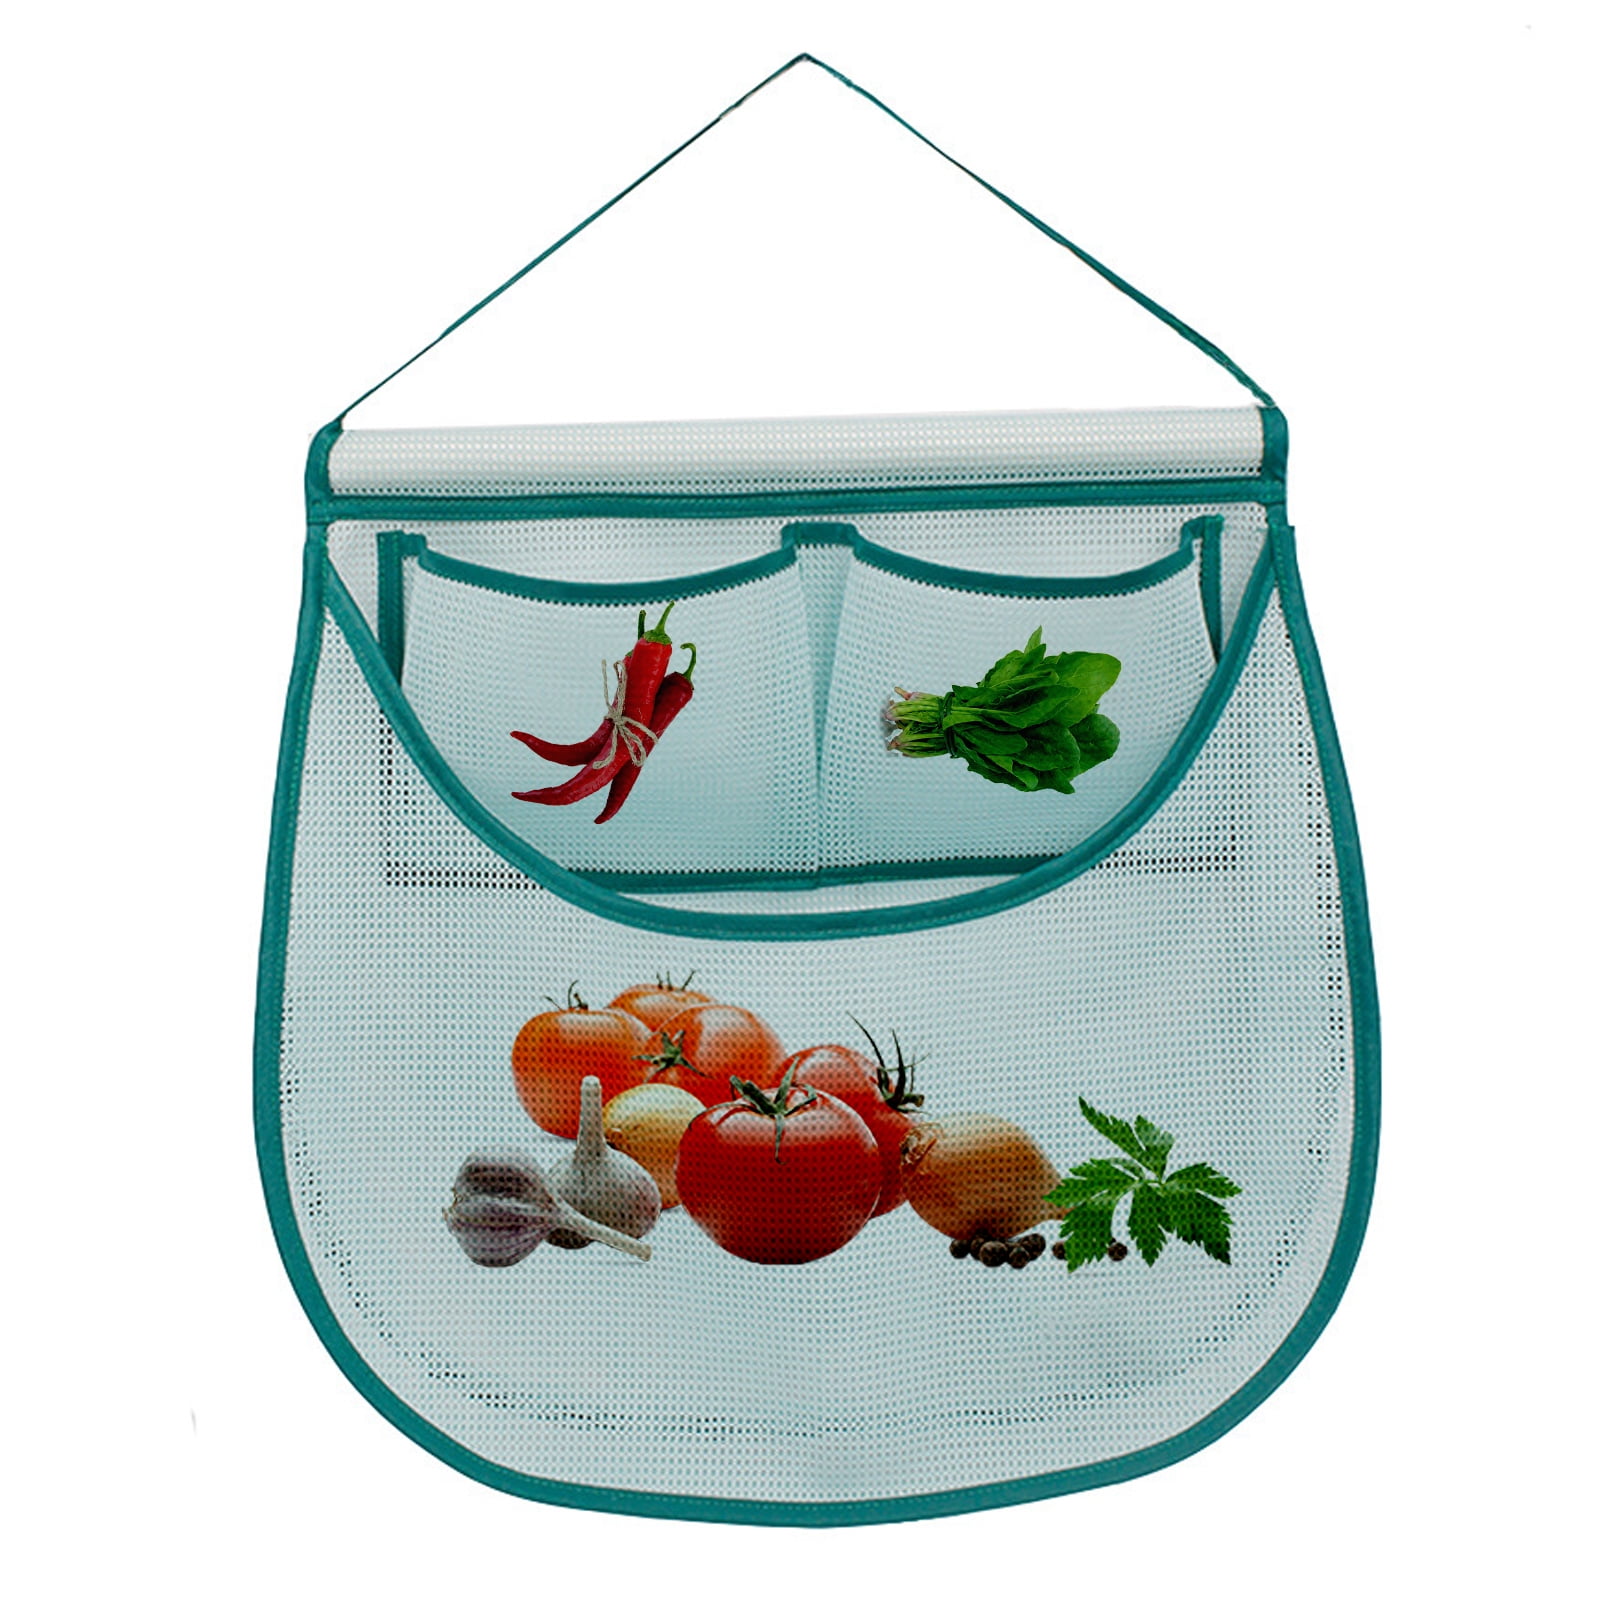 Food mesh bag Lightweight Reusable Drawstring Grocery Breathable Practical 